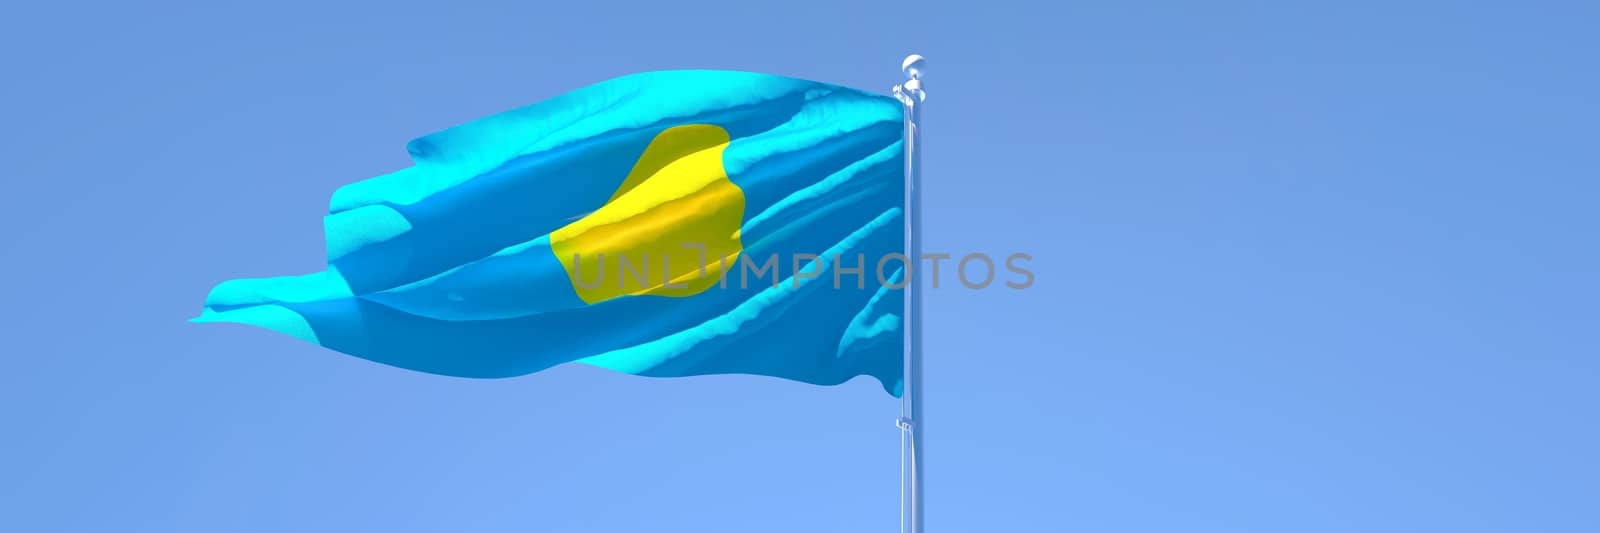 3D rendering of the national flag of Palau waving in the wind against a blue sky